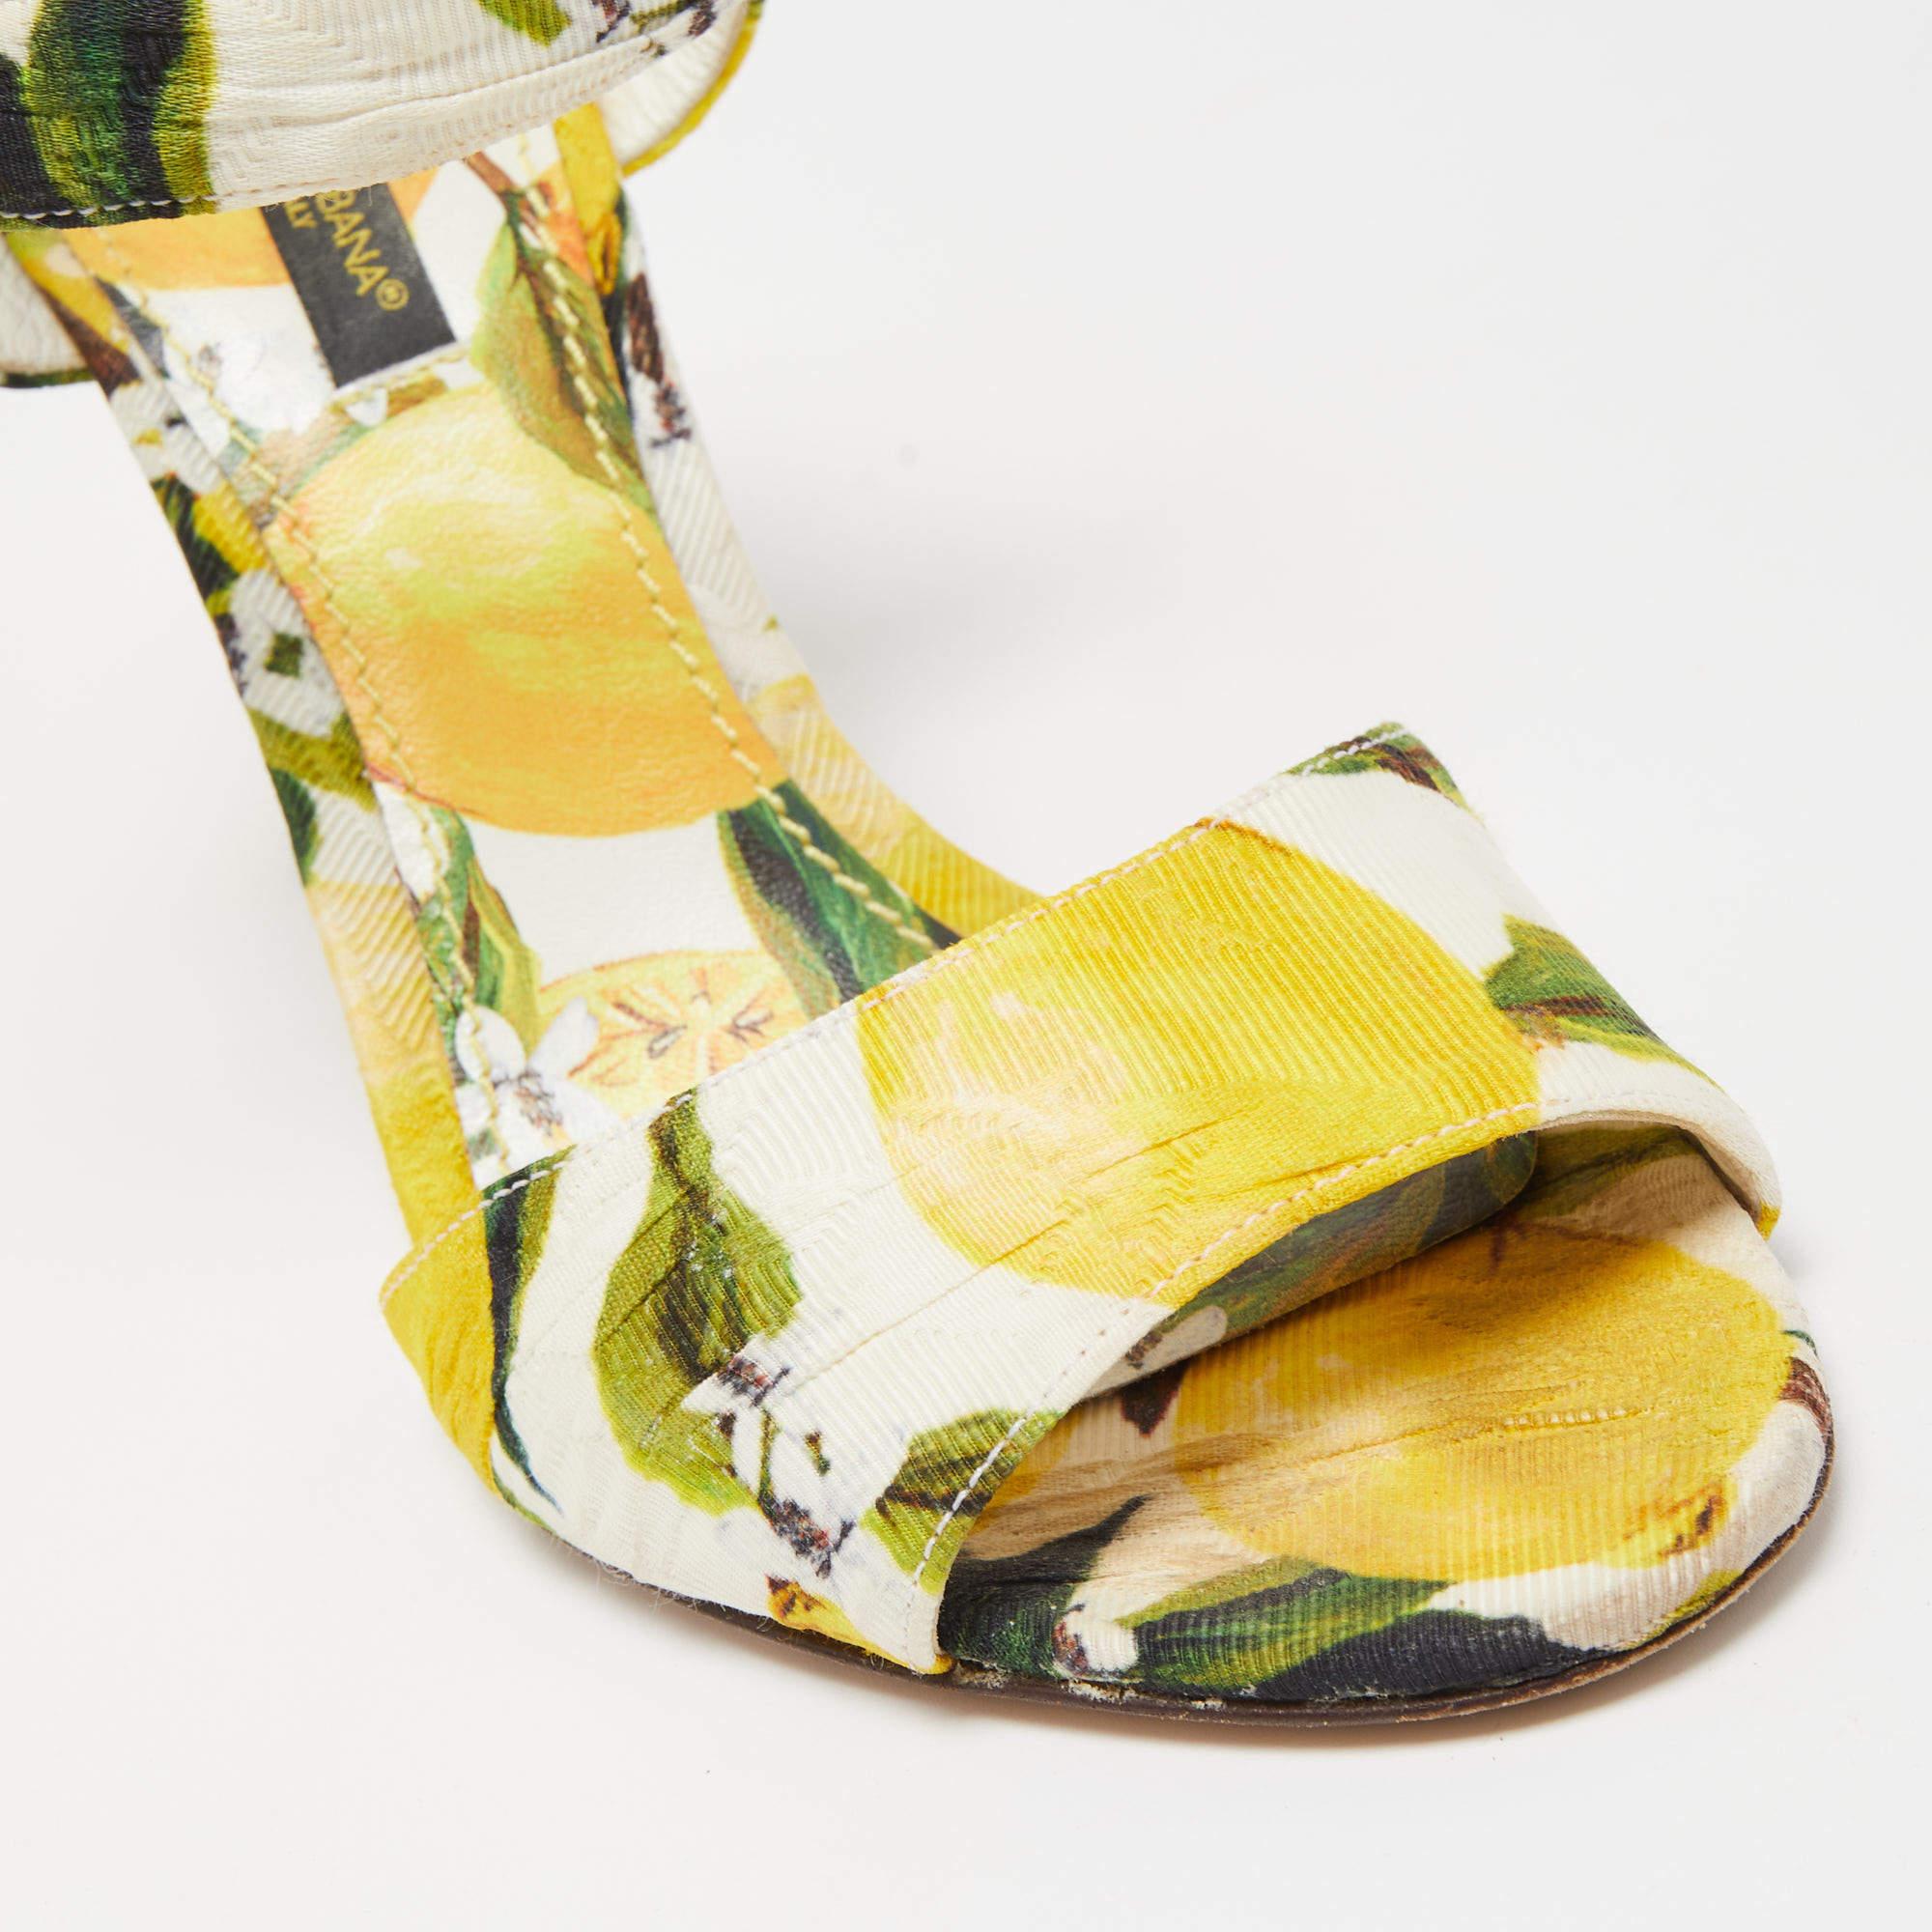 Dolce & Gabbana Multicolor Brocade Fabric Ankle Strap Sandals Size 36.5 For Sale 3